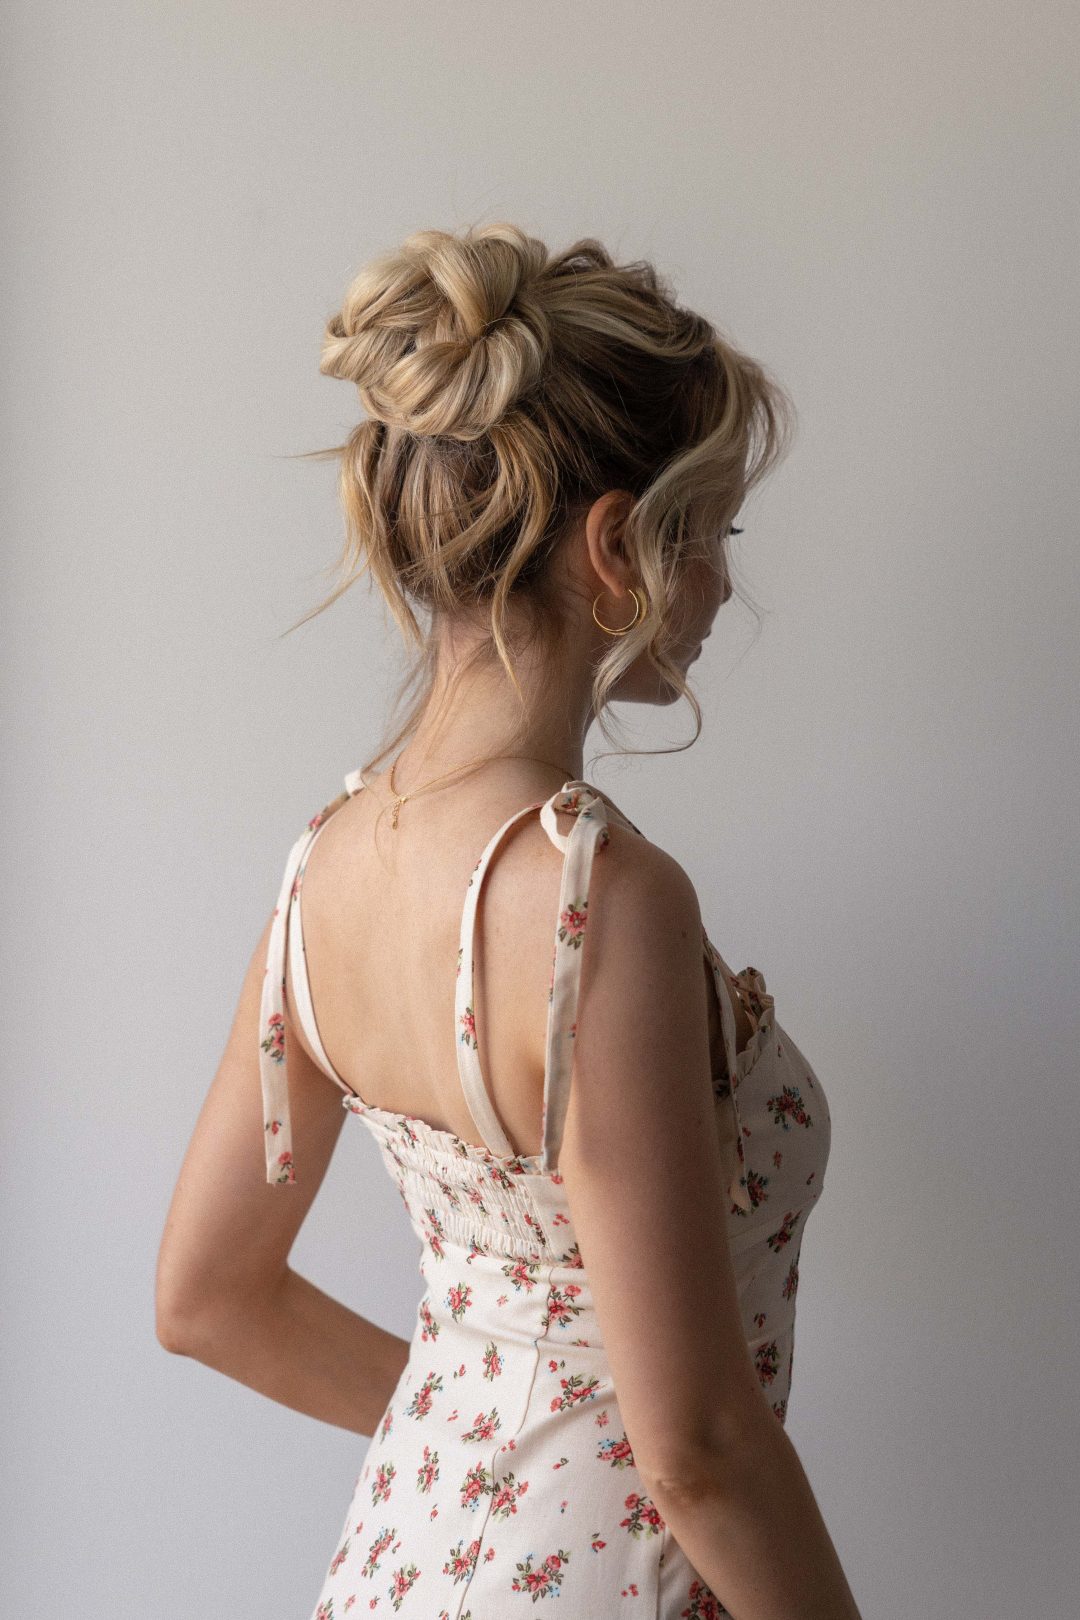 HIGH MESSY BUN HAIRSTYLE FOR SUMMER 20210 | Perfect for Prom, Bridal, Wedding, Graduation